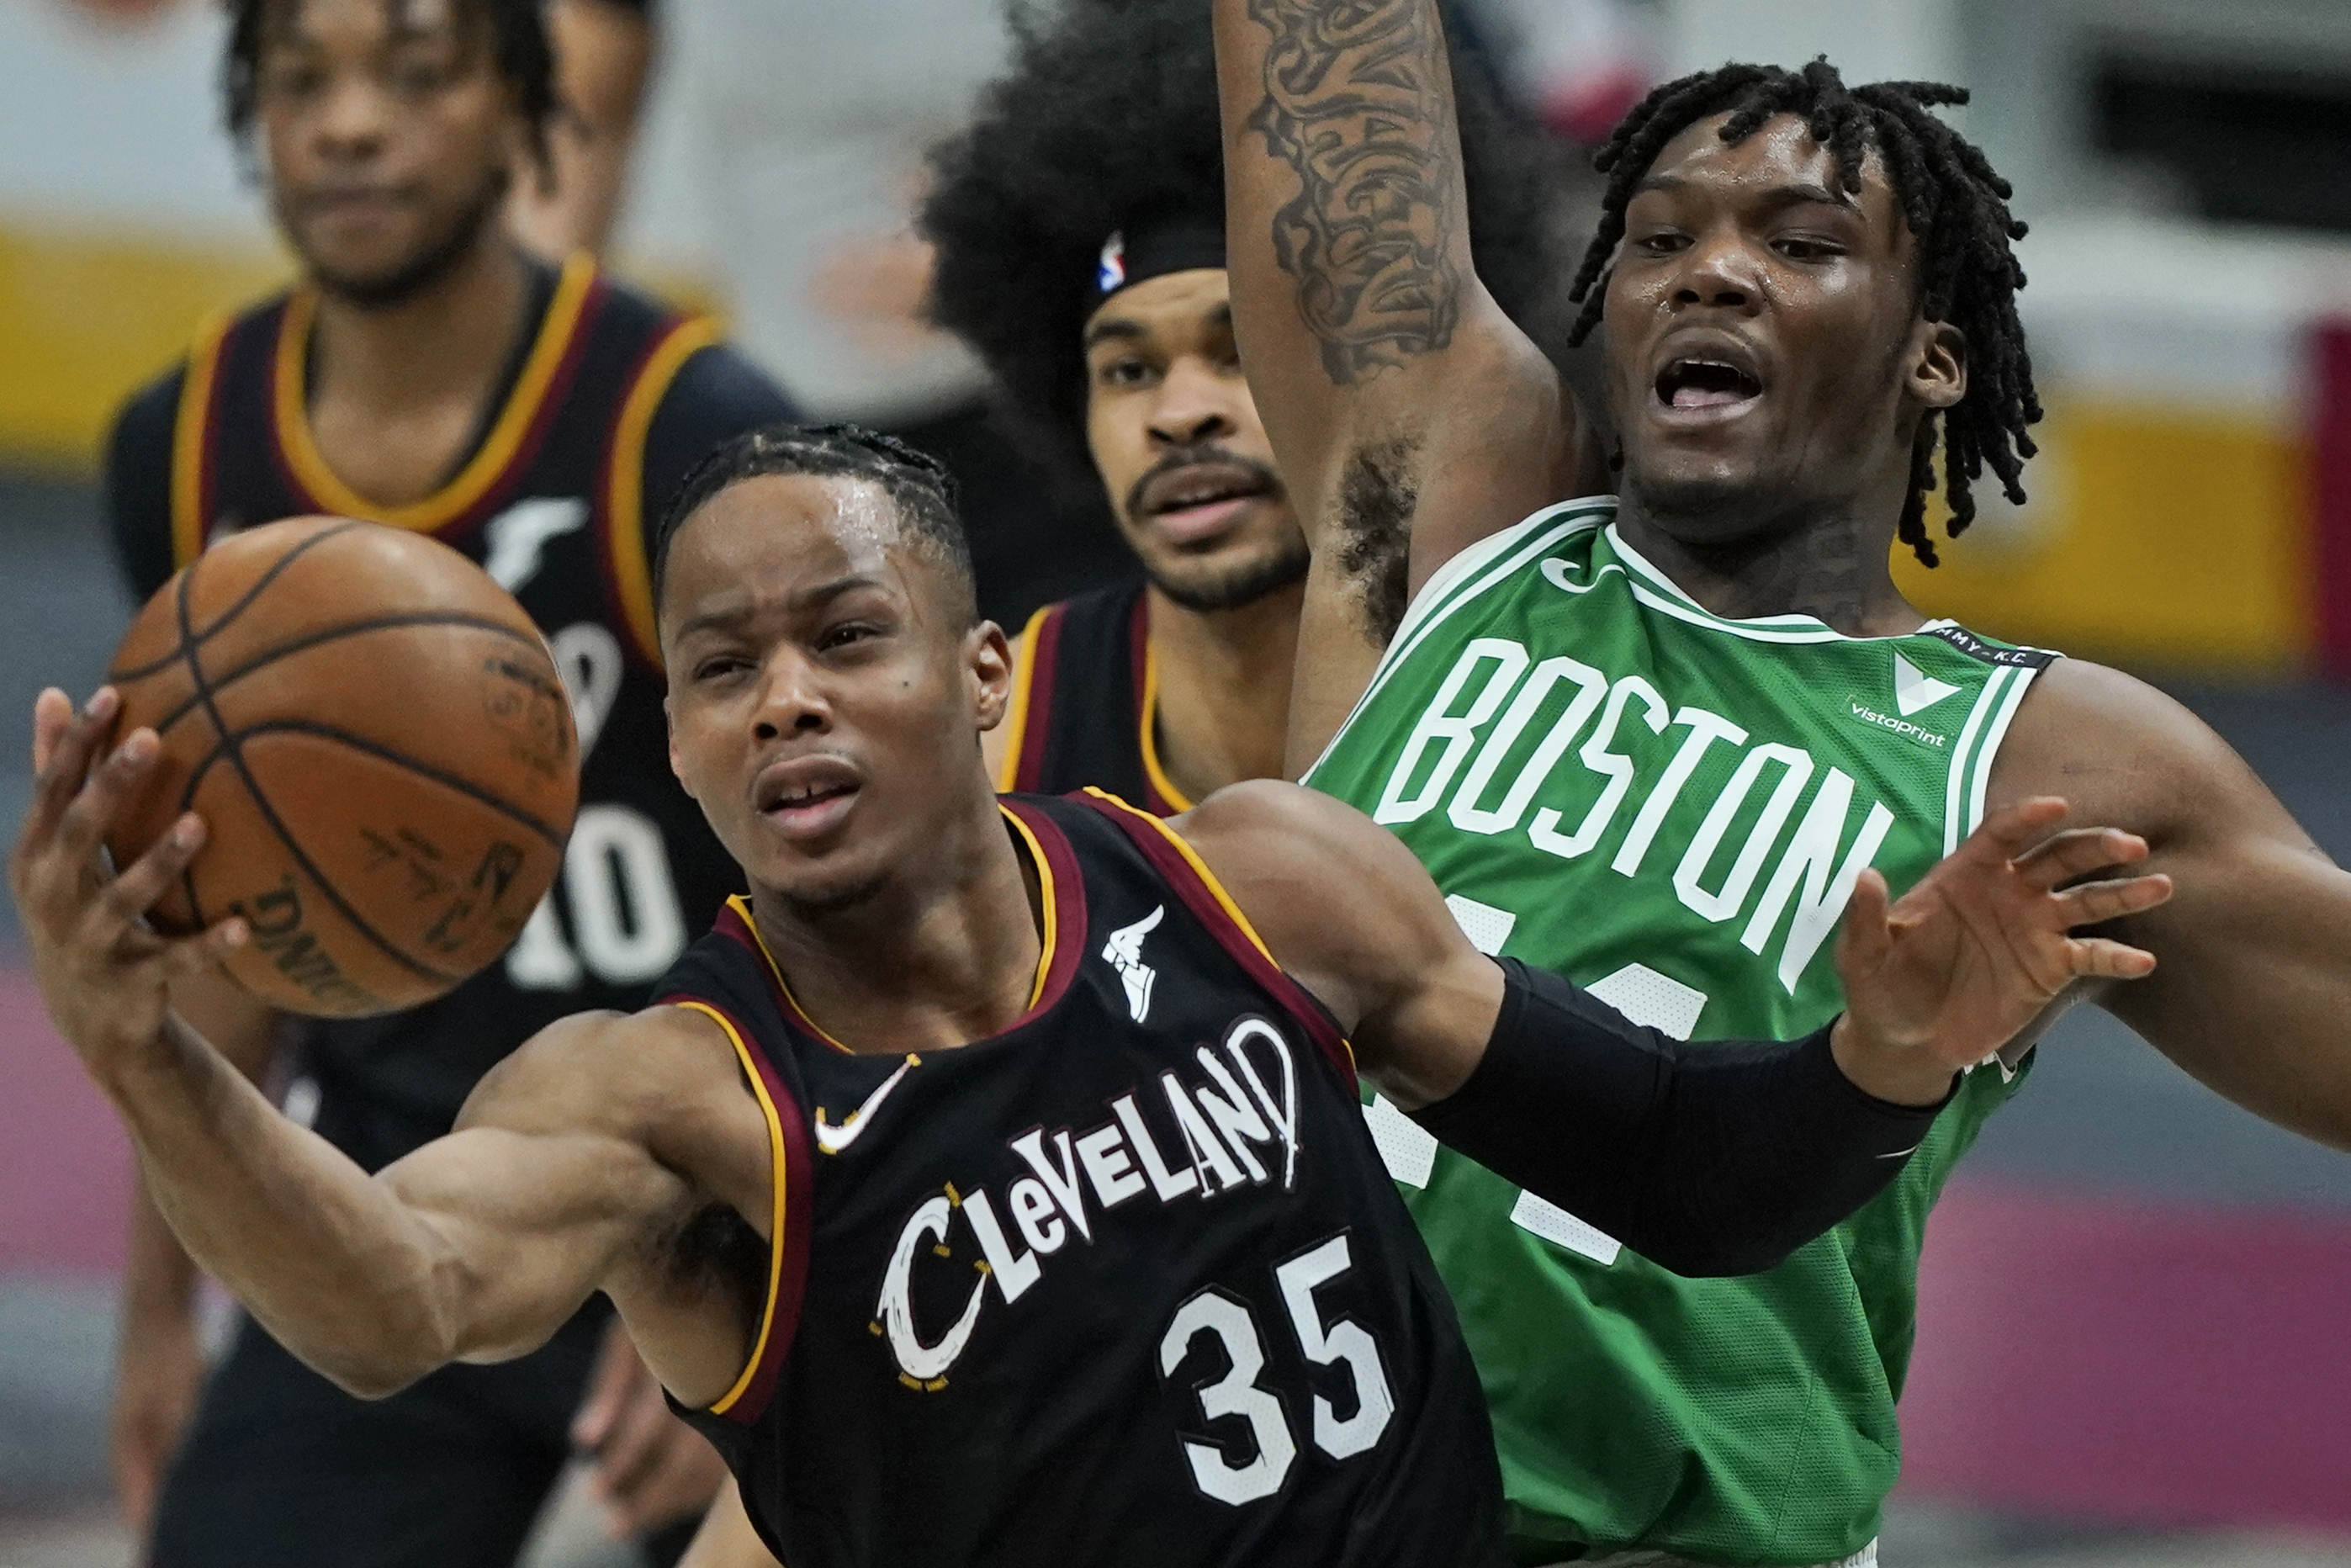 Isaac Okoro Explains Why He Felt More Comfortable In Cavs' First